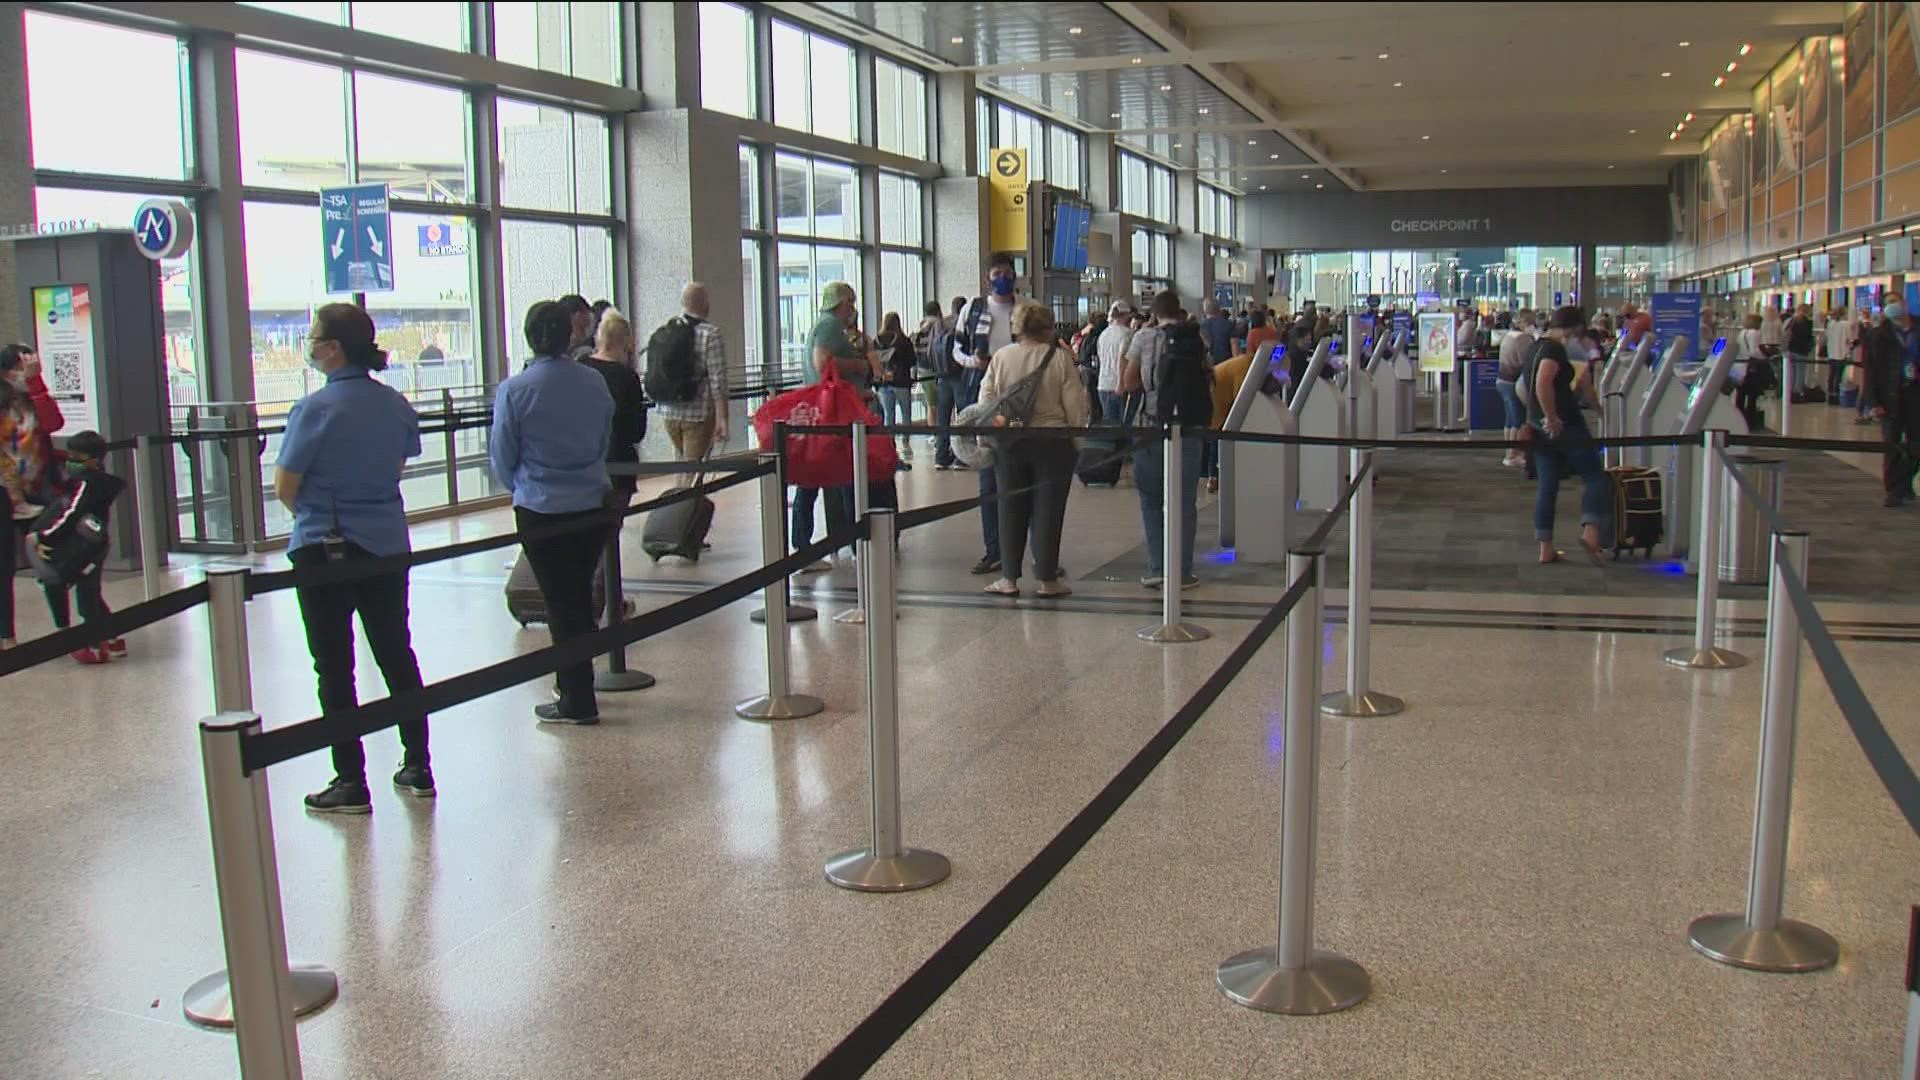 According to city documents, the airport will serve 40% more passenger seat capacity this summer compared to the same time in 2019.